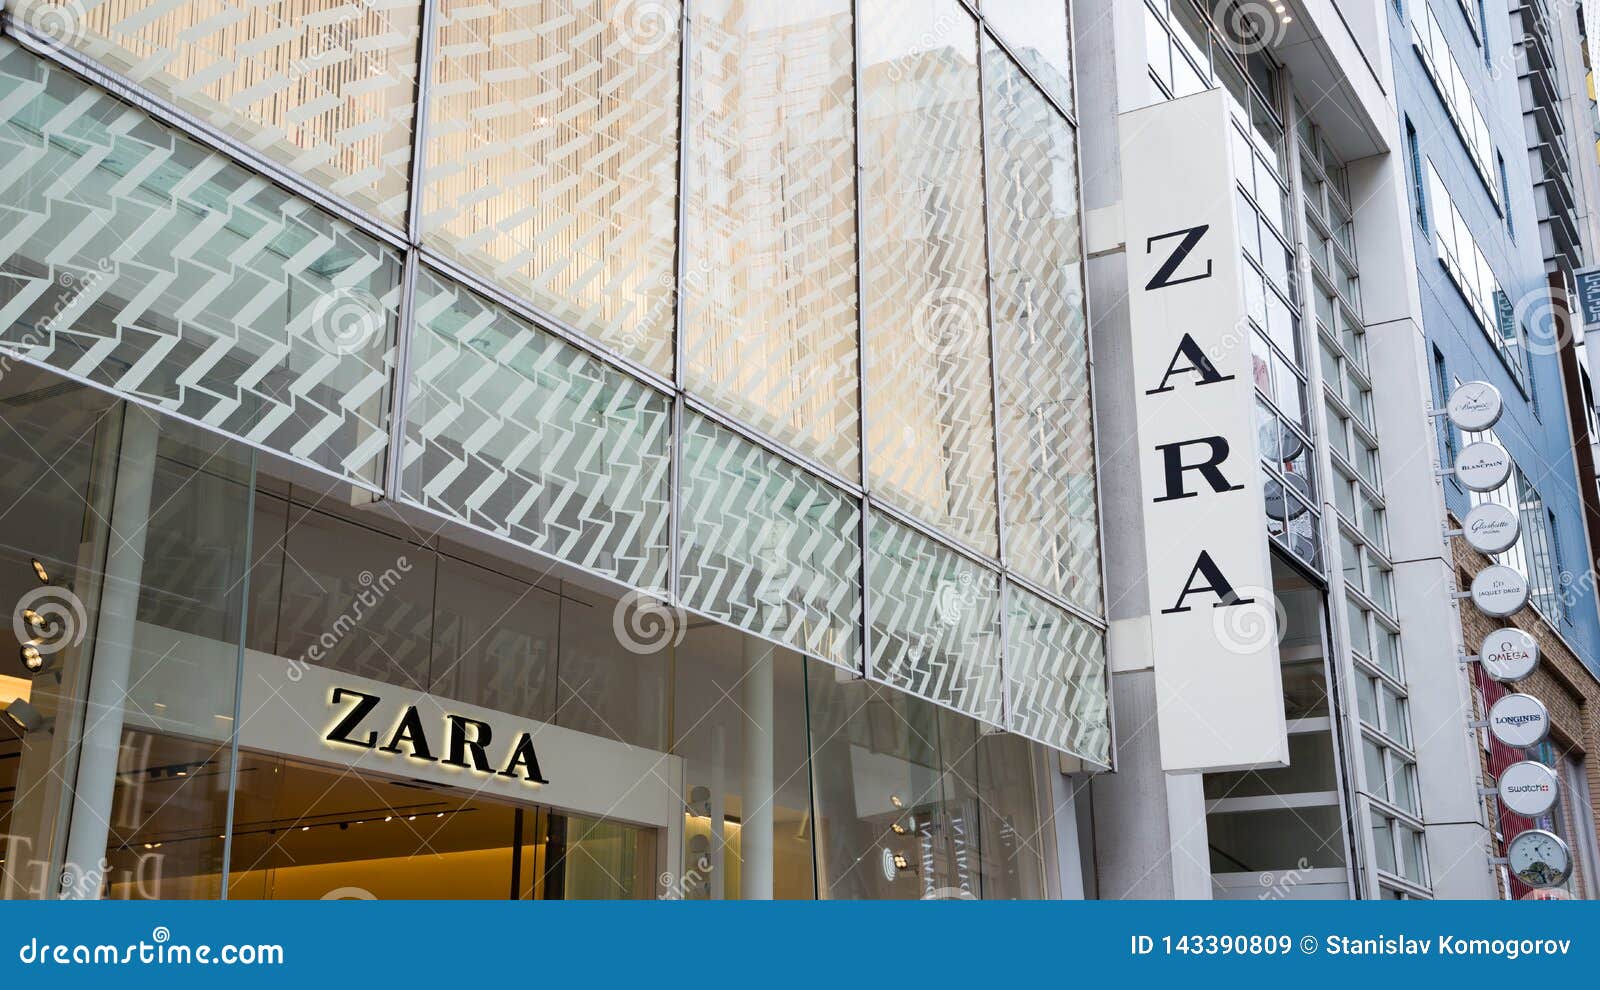 what is zara known for